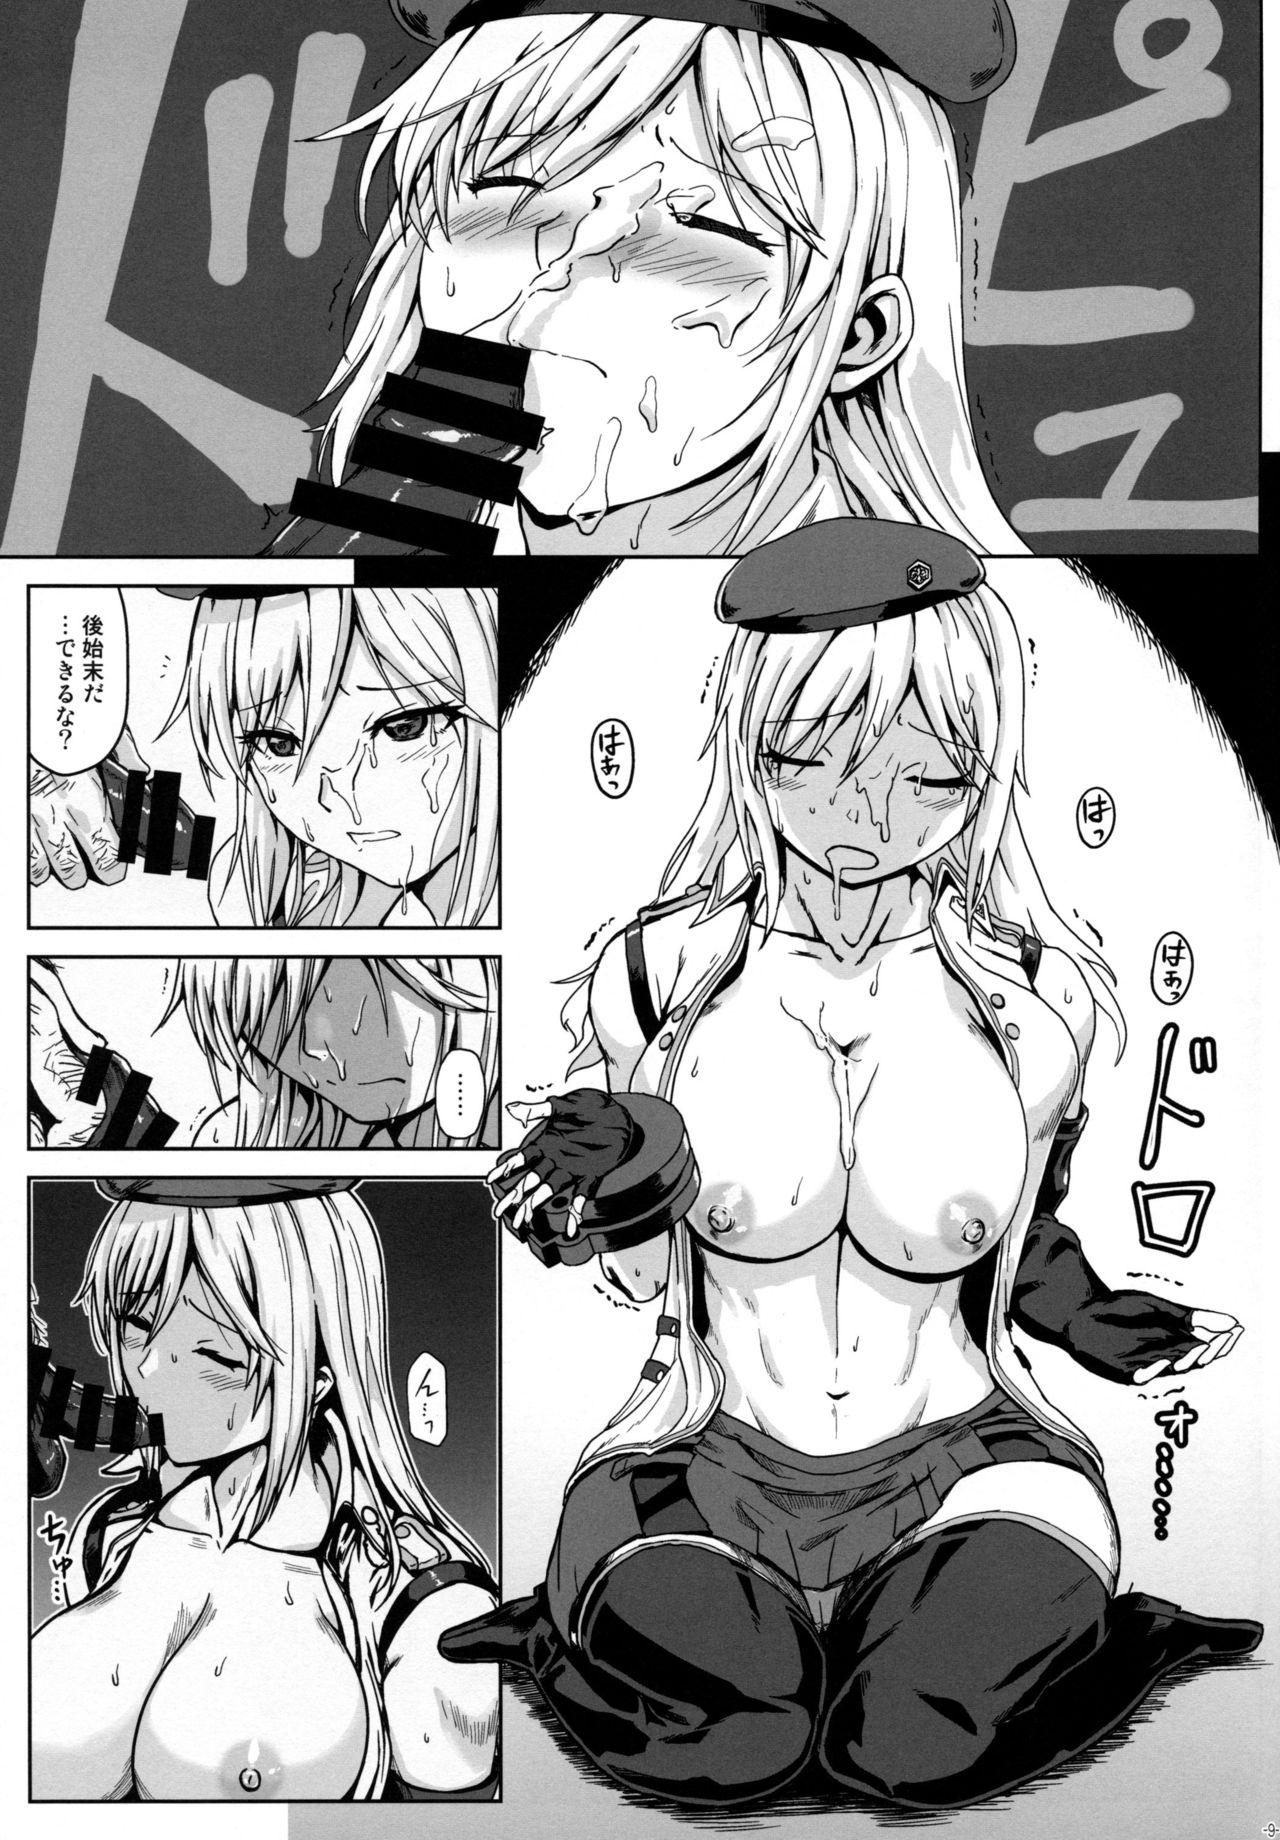 Stepmom (C97) [Lithium (Uchiga)] Again #7 "The Banquet of Madness (Mae)" (God Eater) - God eater Amateur Blow Job - Page 8